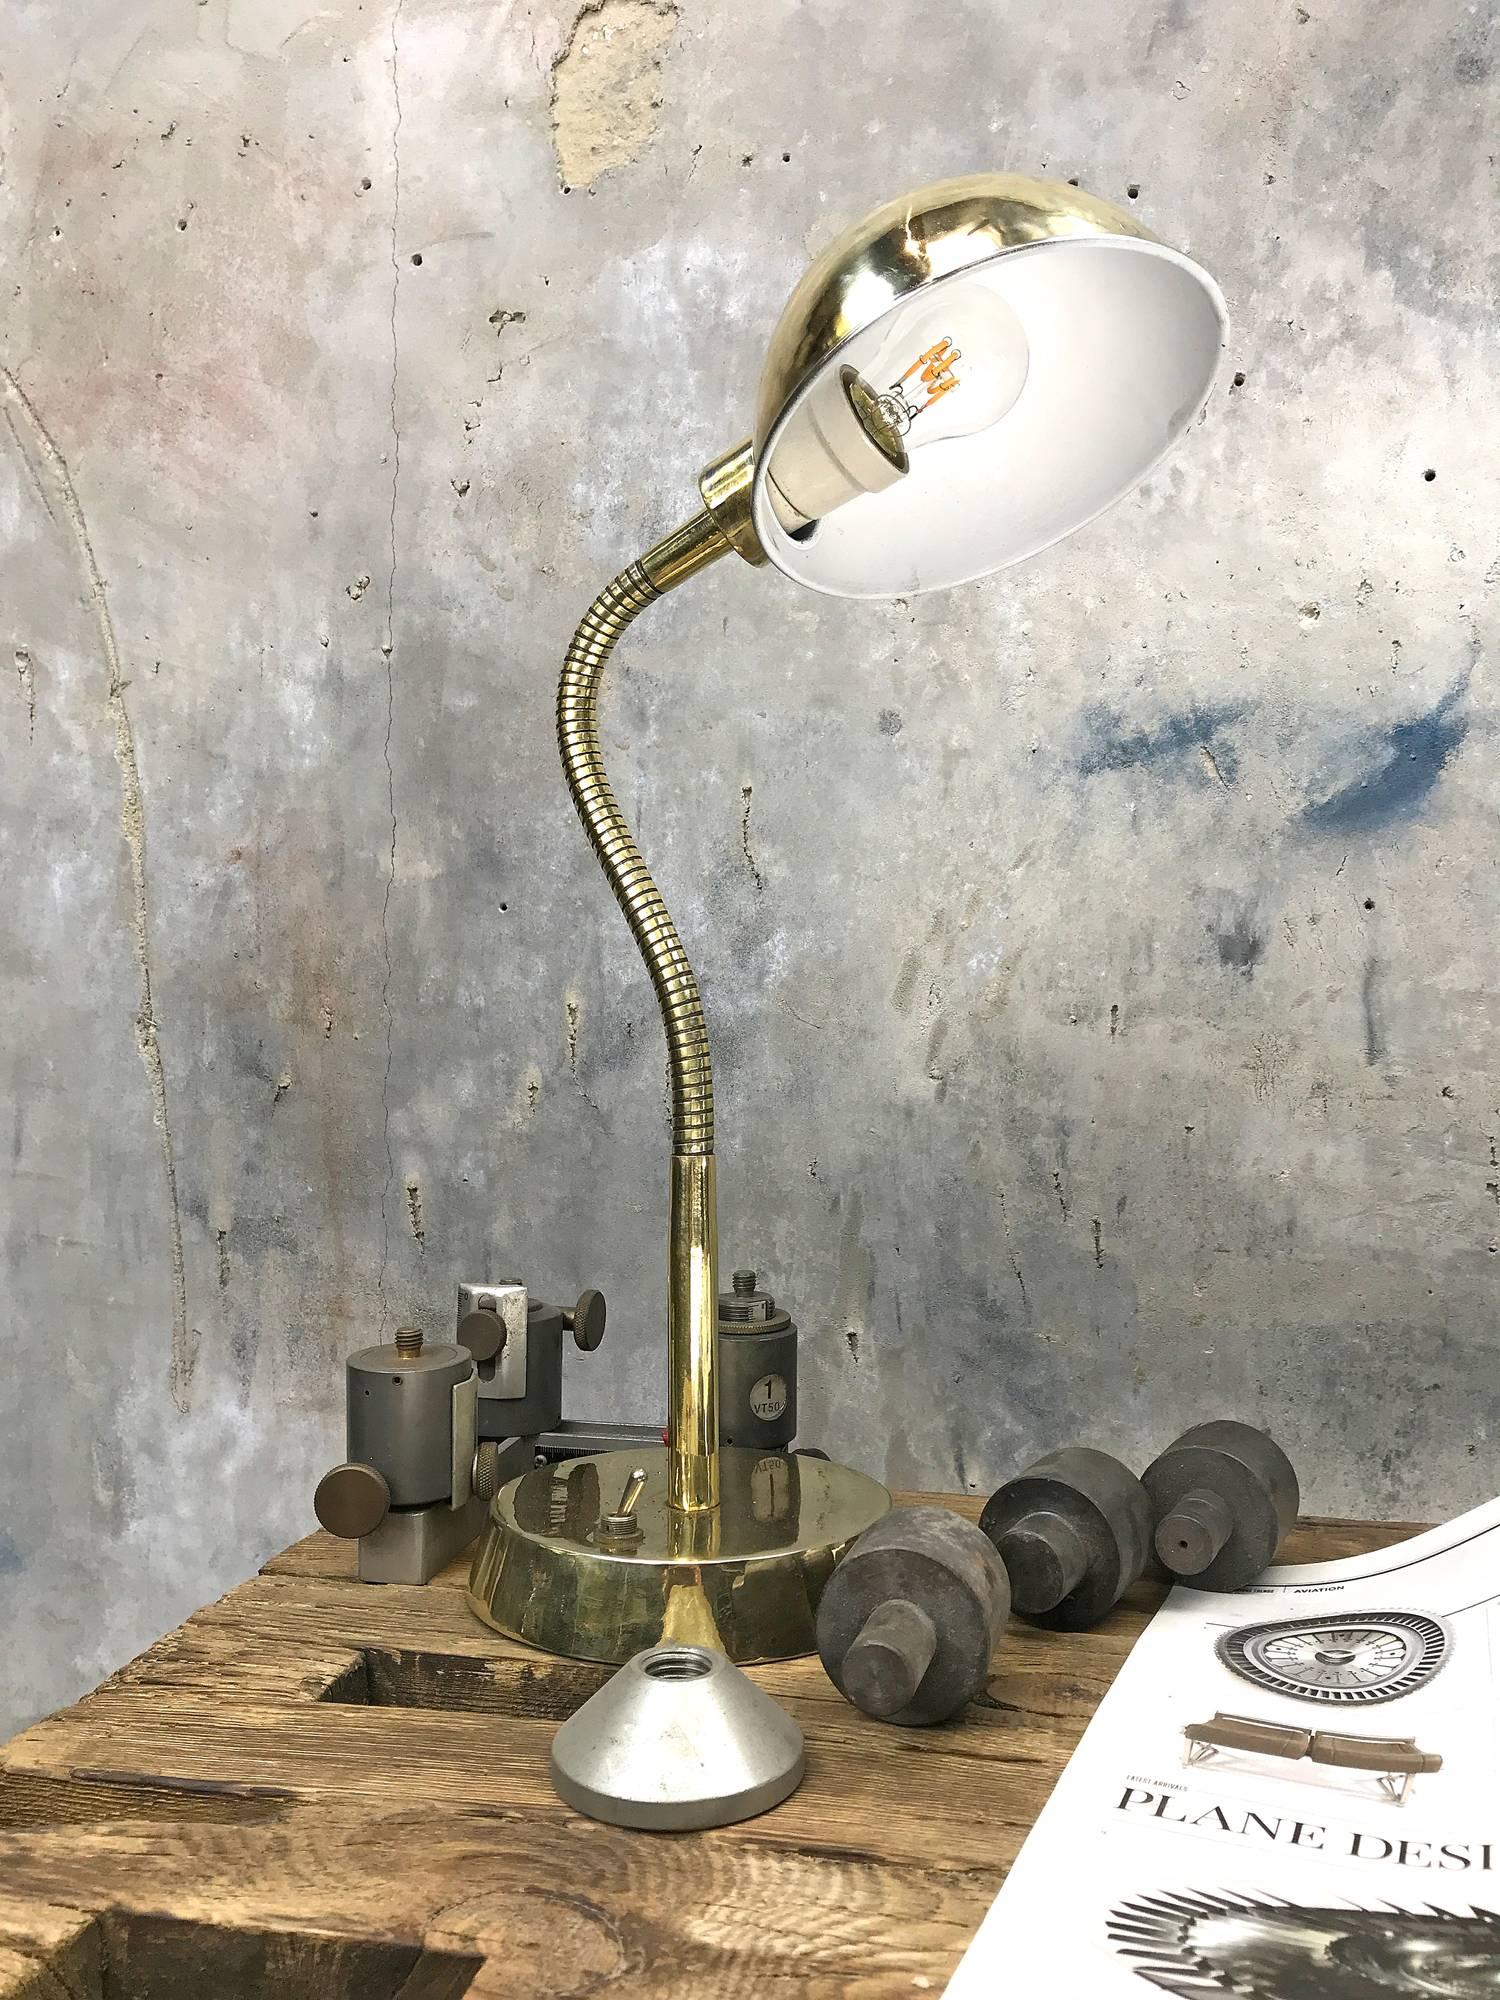 Reclaimed 1970s British made retro desk lamp.

Restored and rewired solid brass goose neck desk lamp fitted with retro LED bulb.

Features the original toggle switch and a very strong adjustable goose neck.

Originally these were nickel-plated